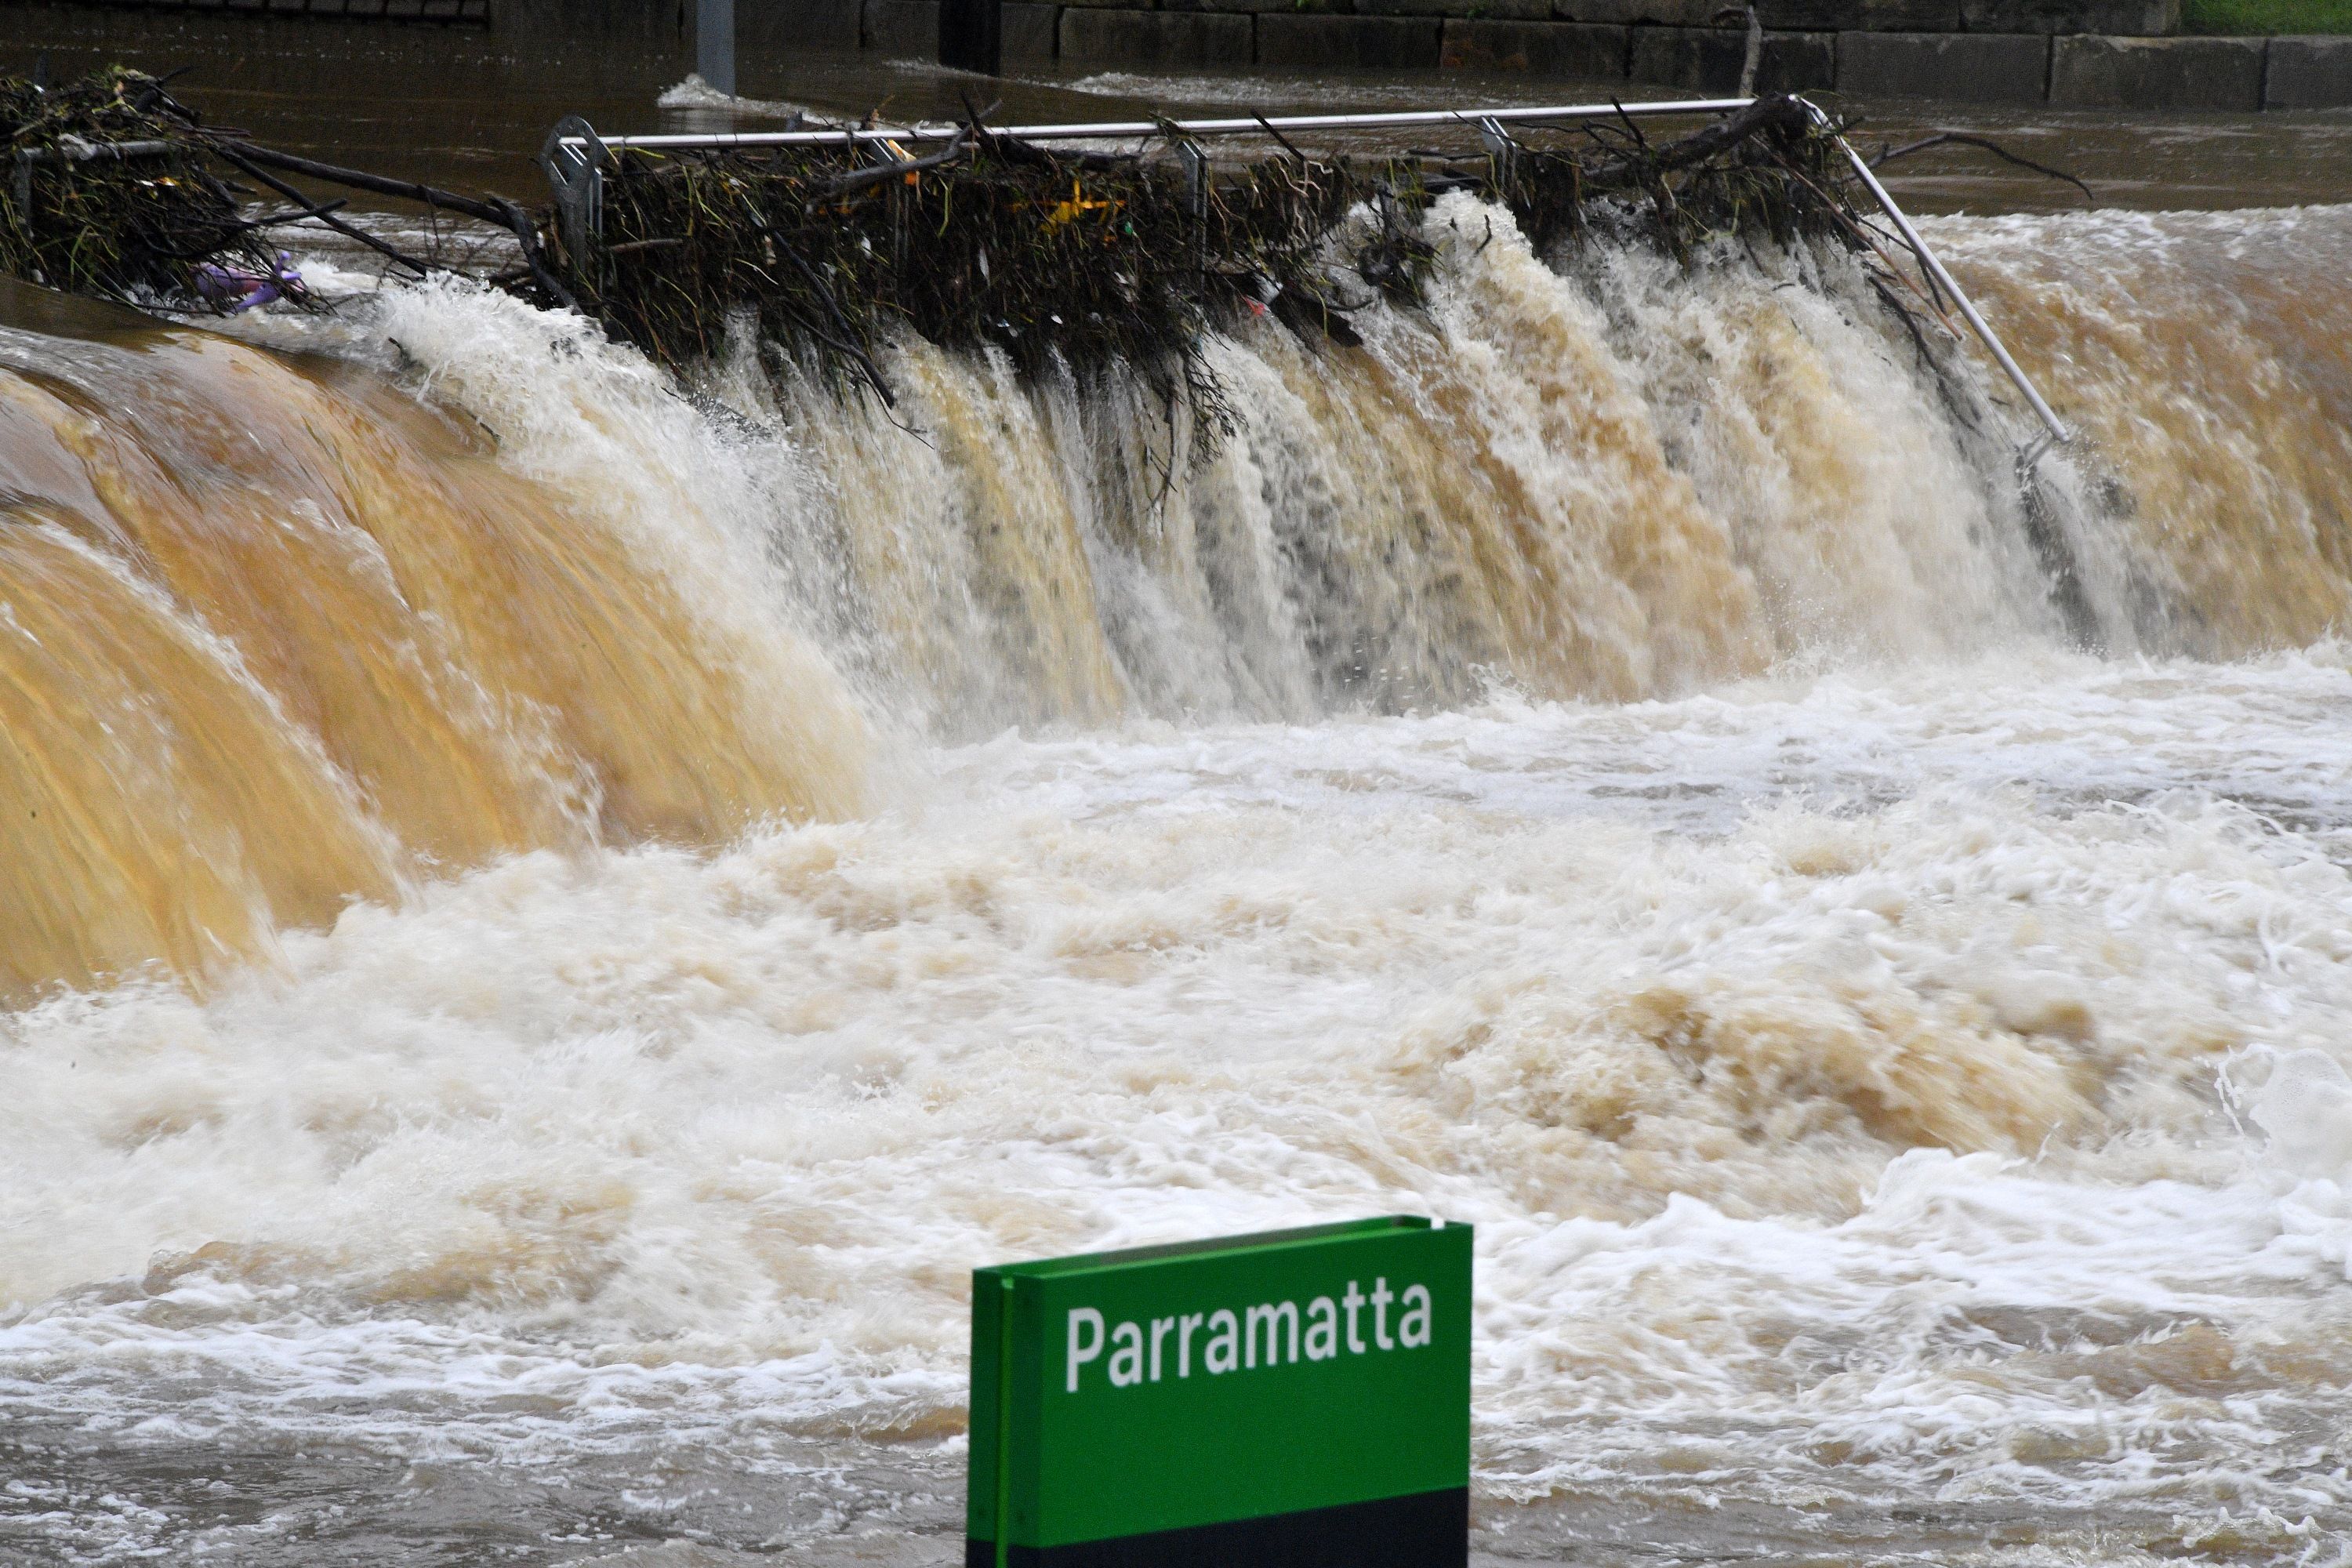 A sign is seen on the banks of the Parramatta river on March 22, 2021